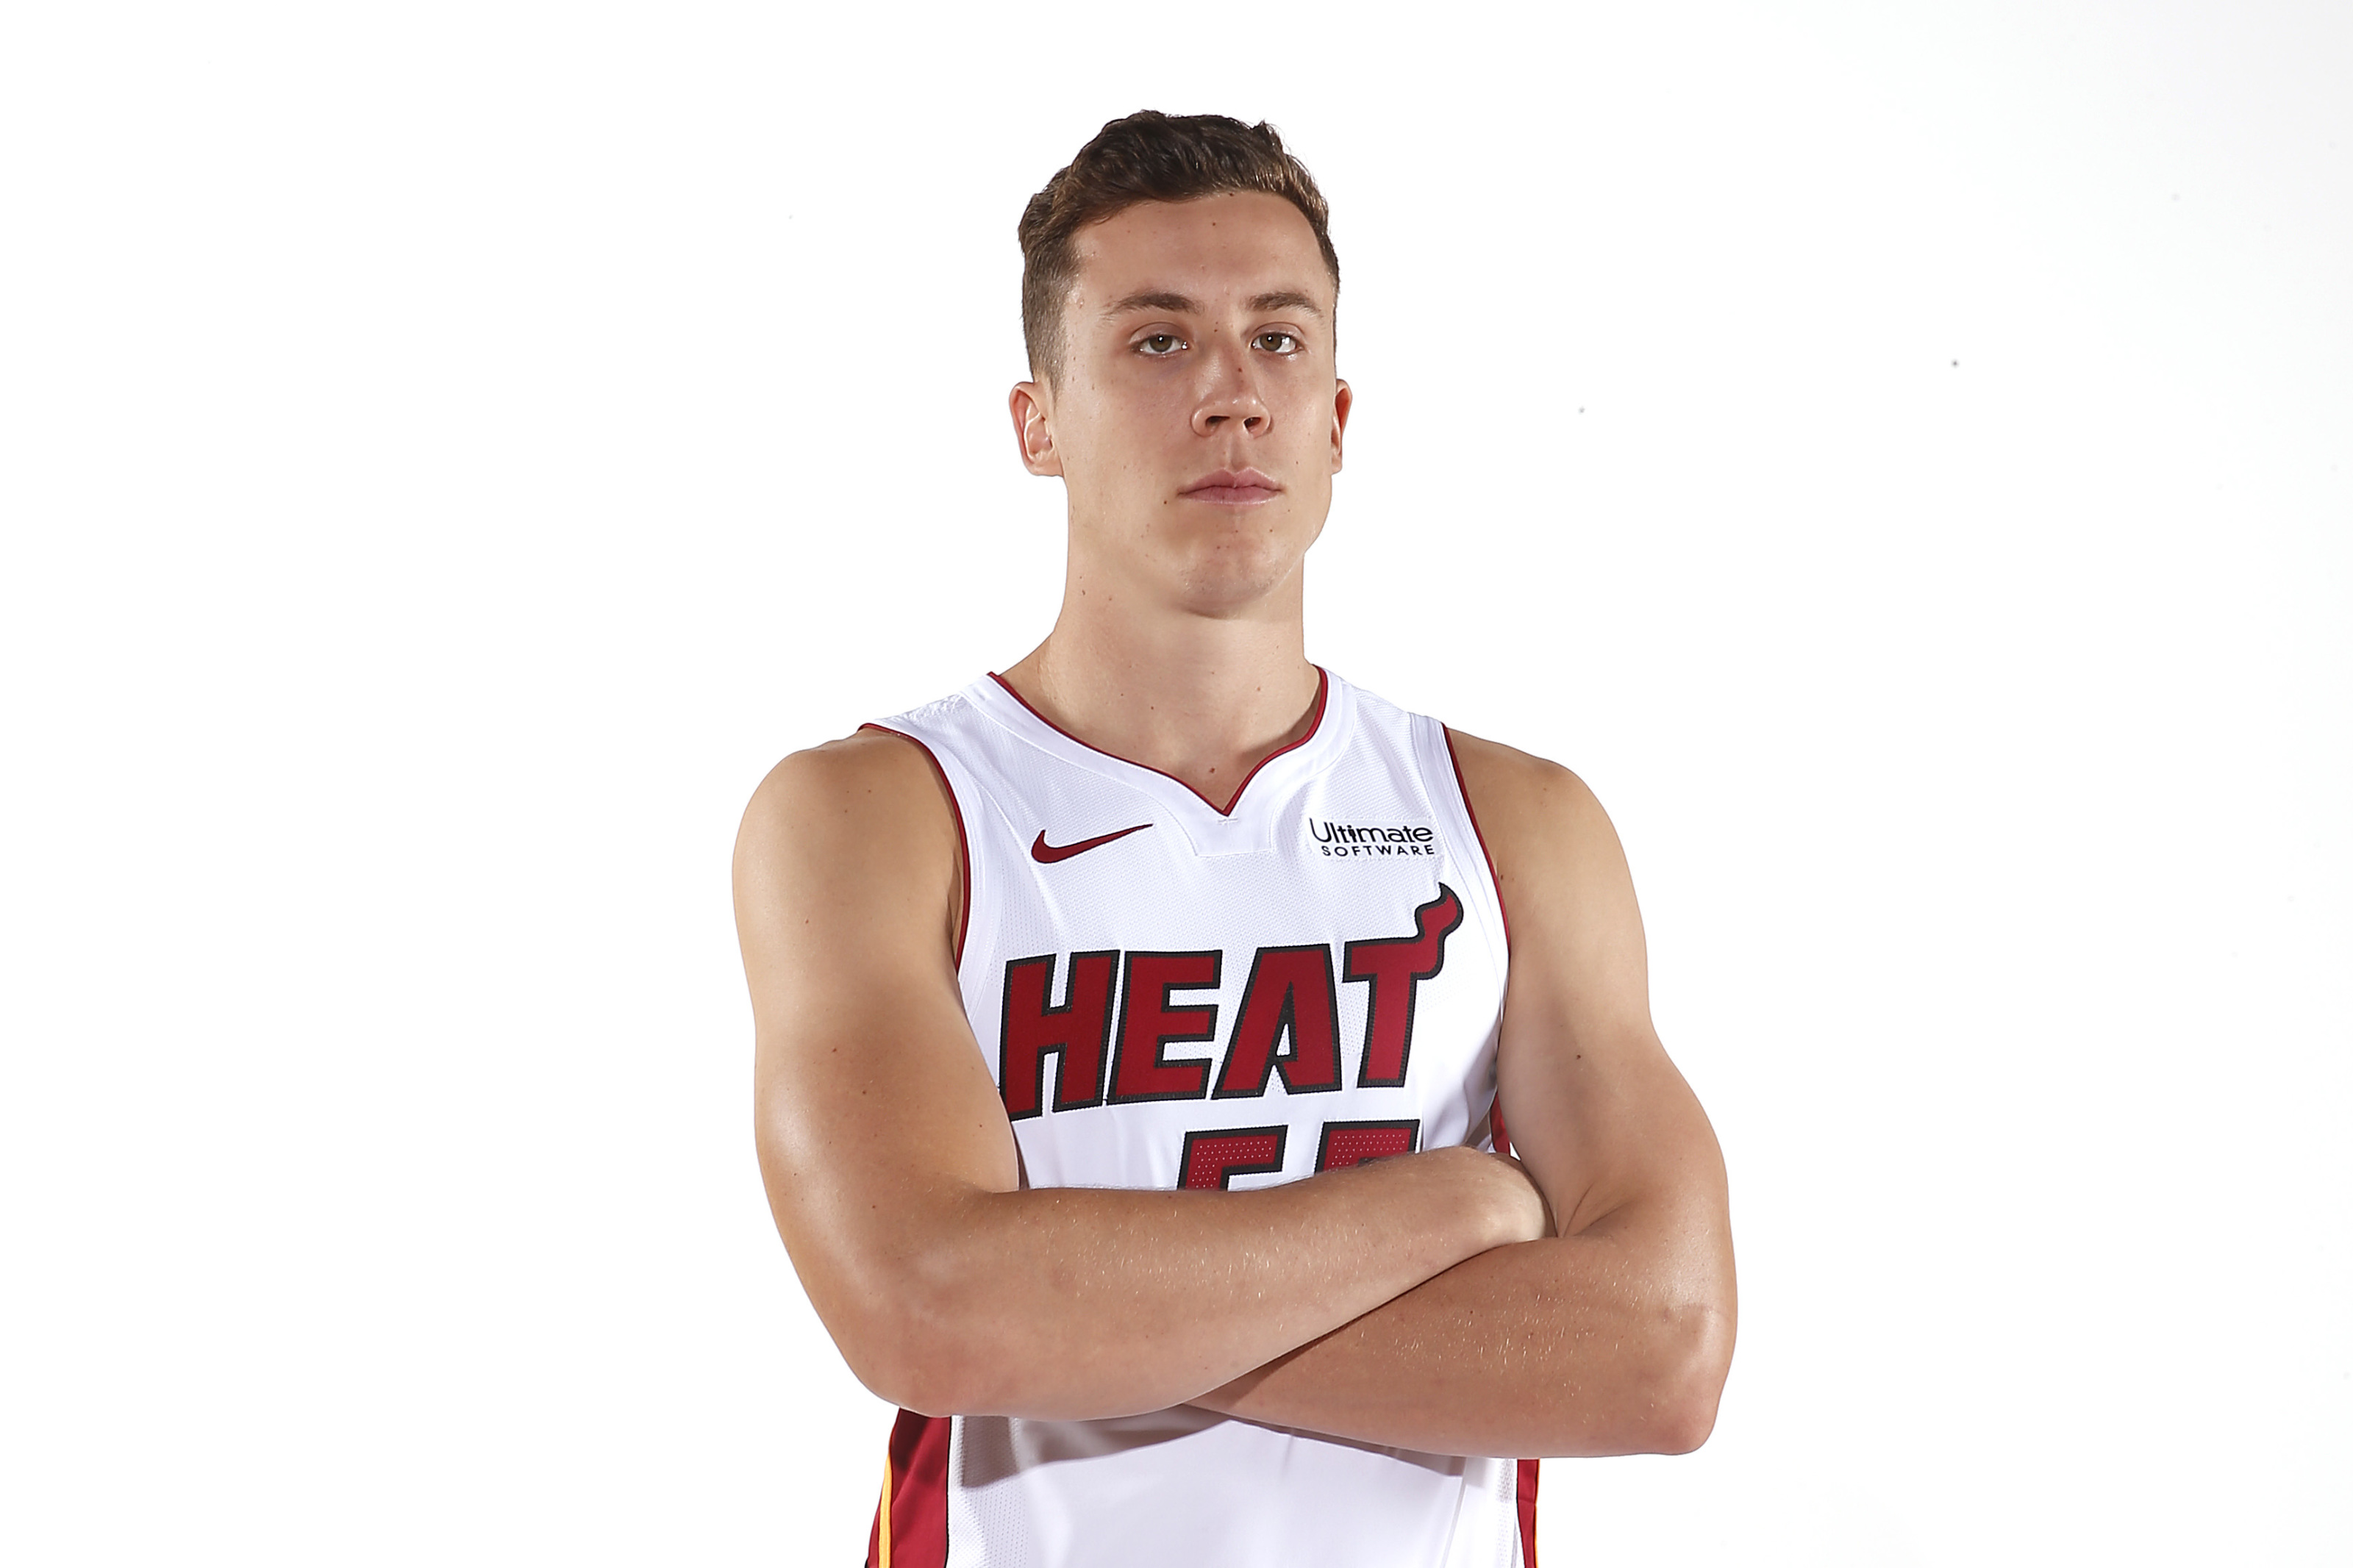 Miami Heat: How Duncan Robinson went from D-III to 97th best player